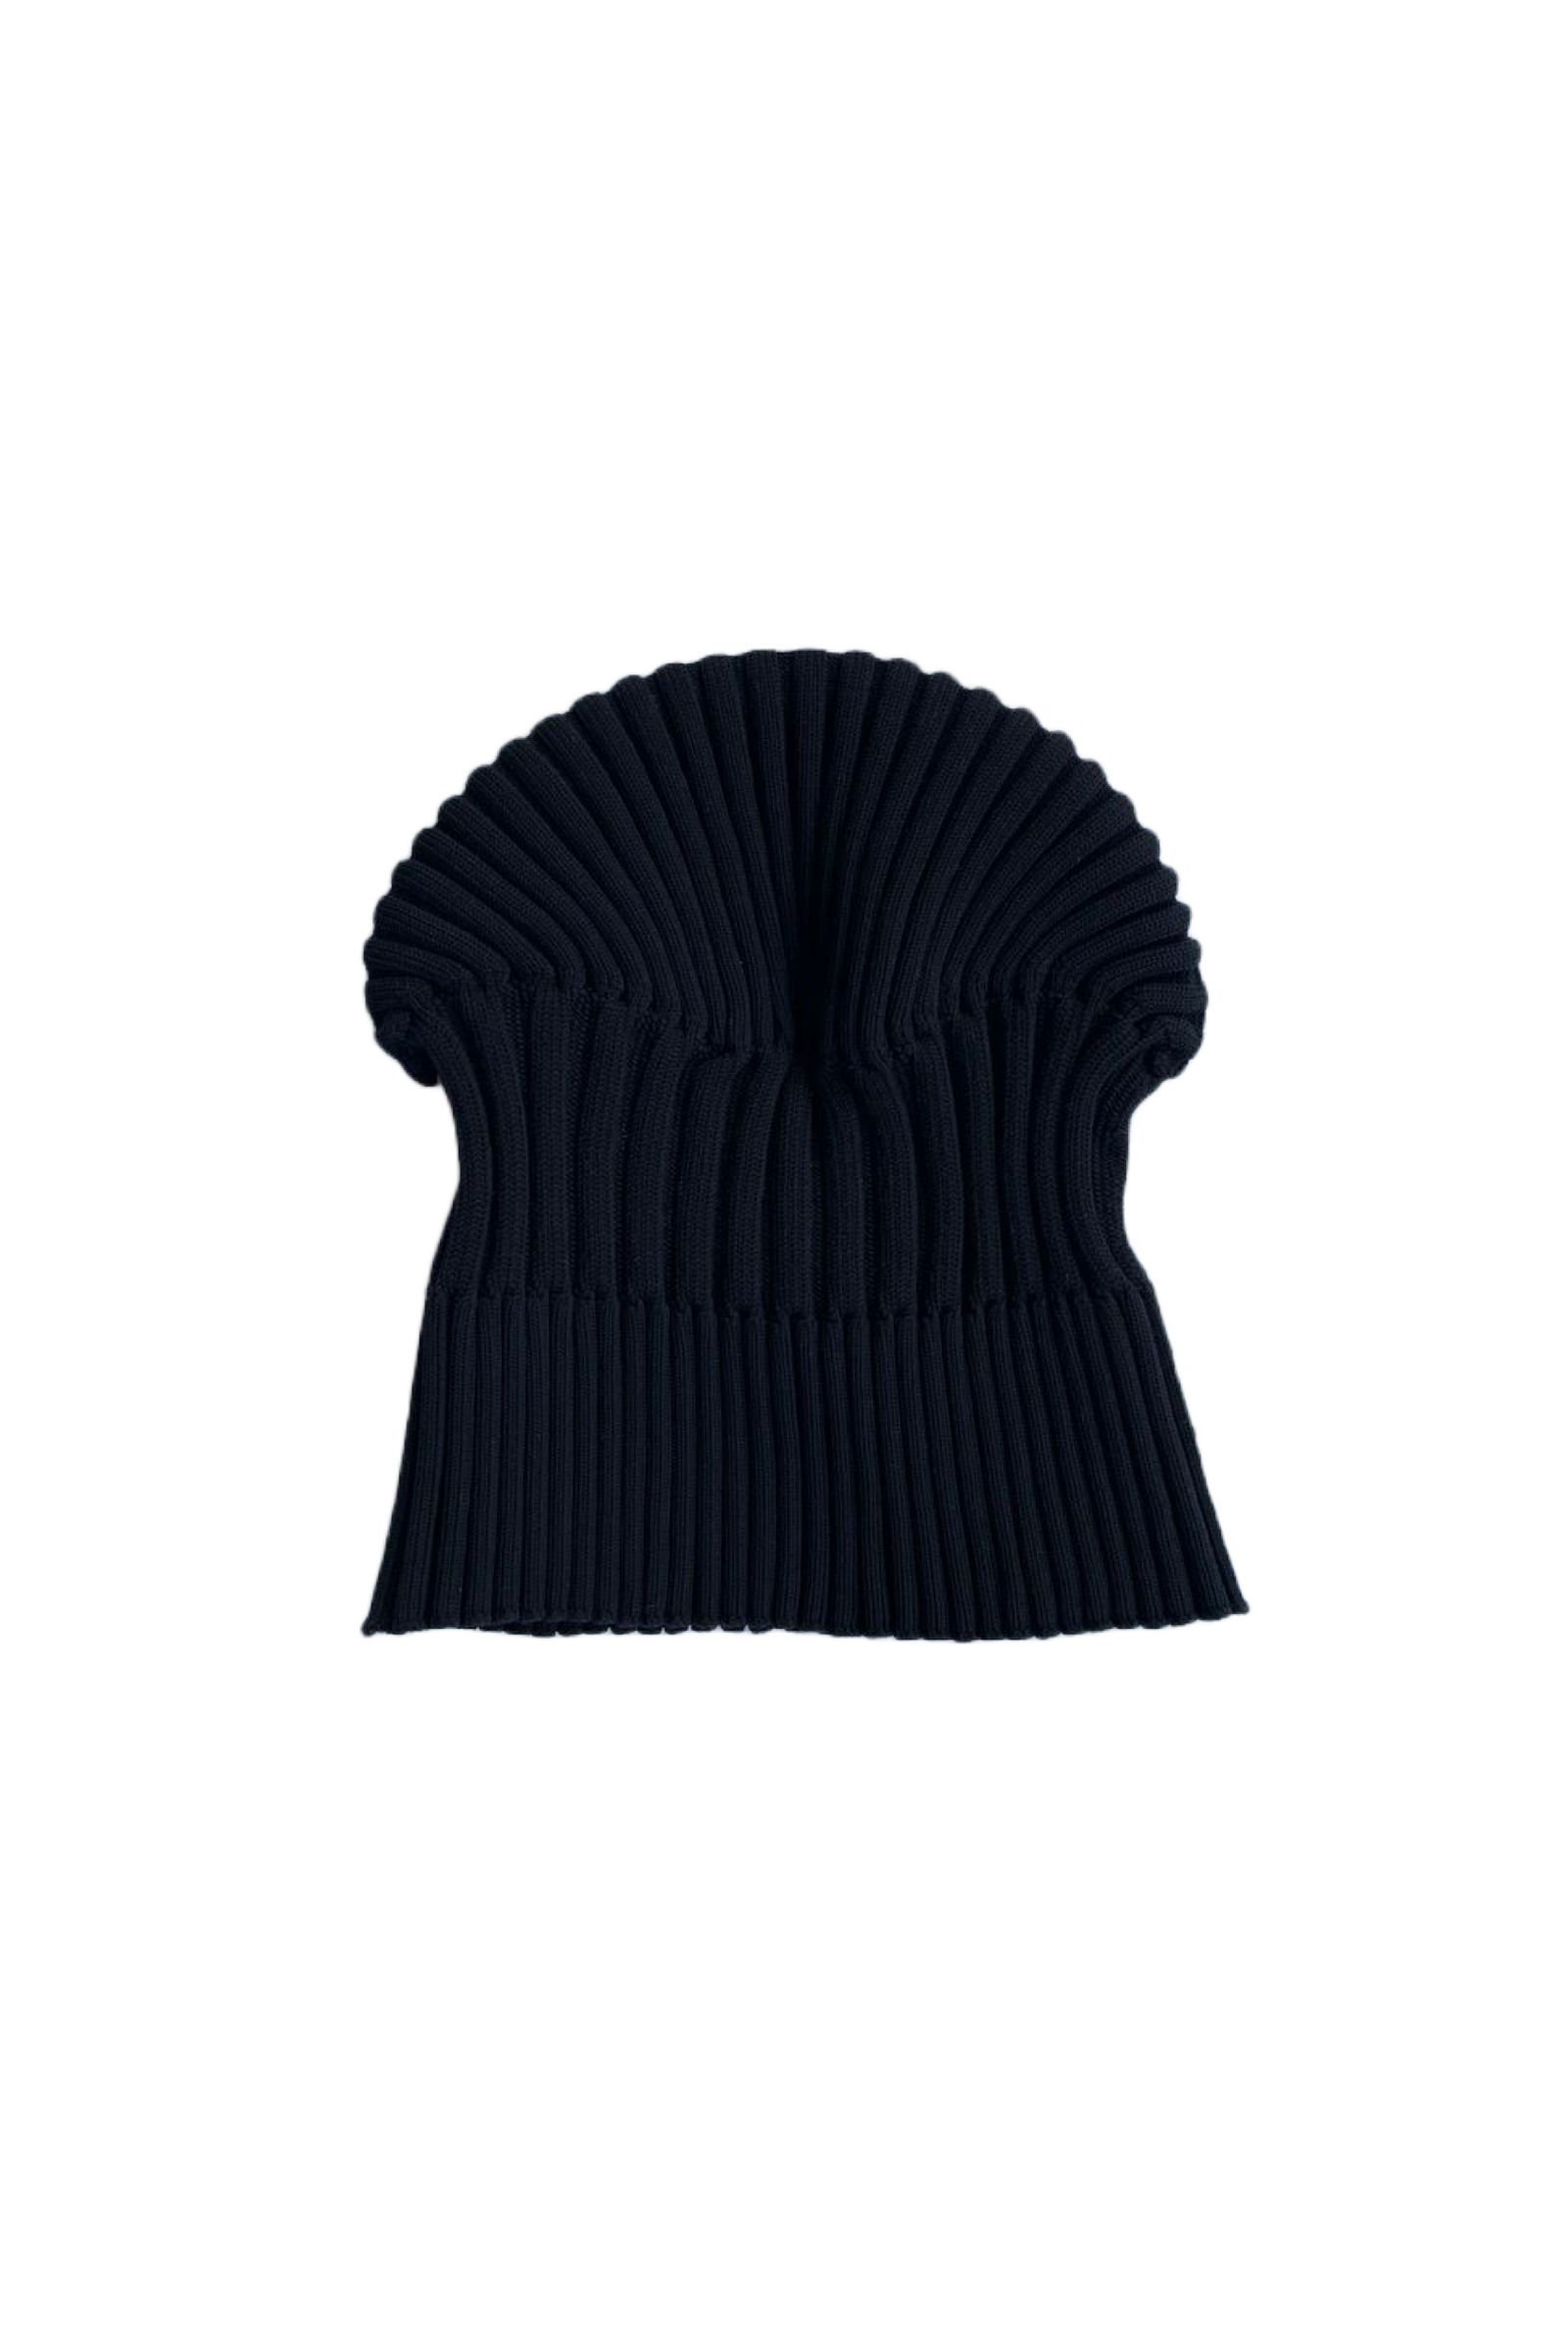 CFCL - fluted knit cap 1 -charcoal- 22aw unisex | asterisk